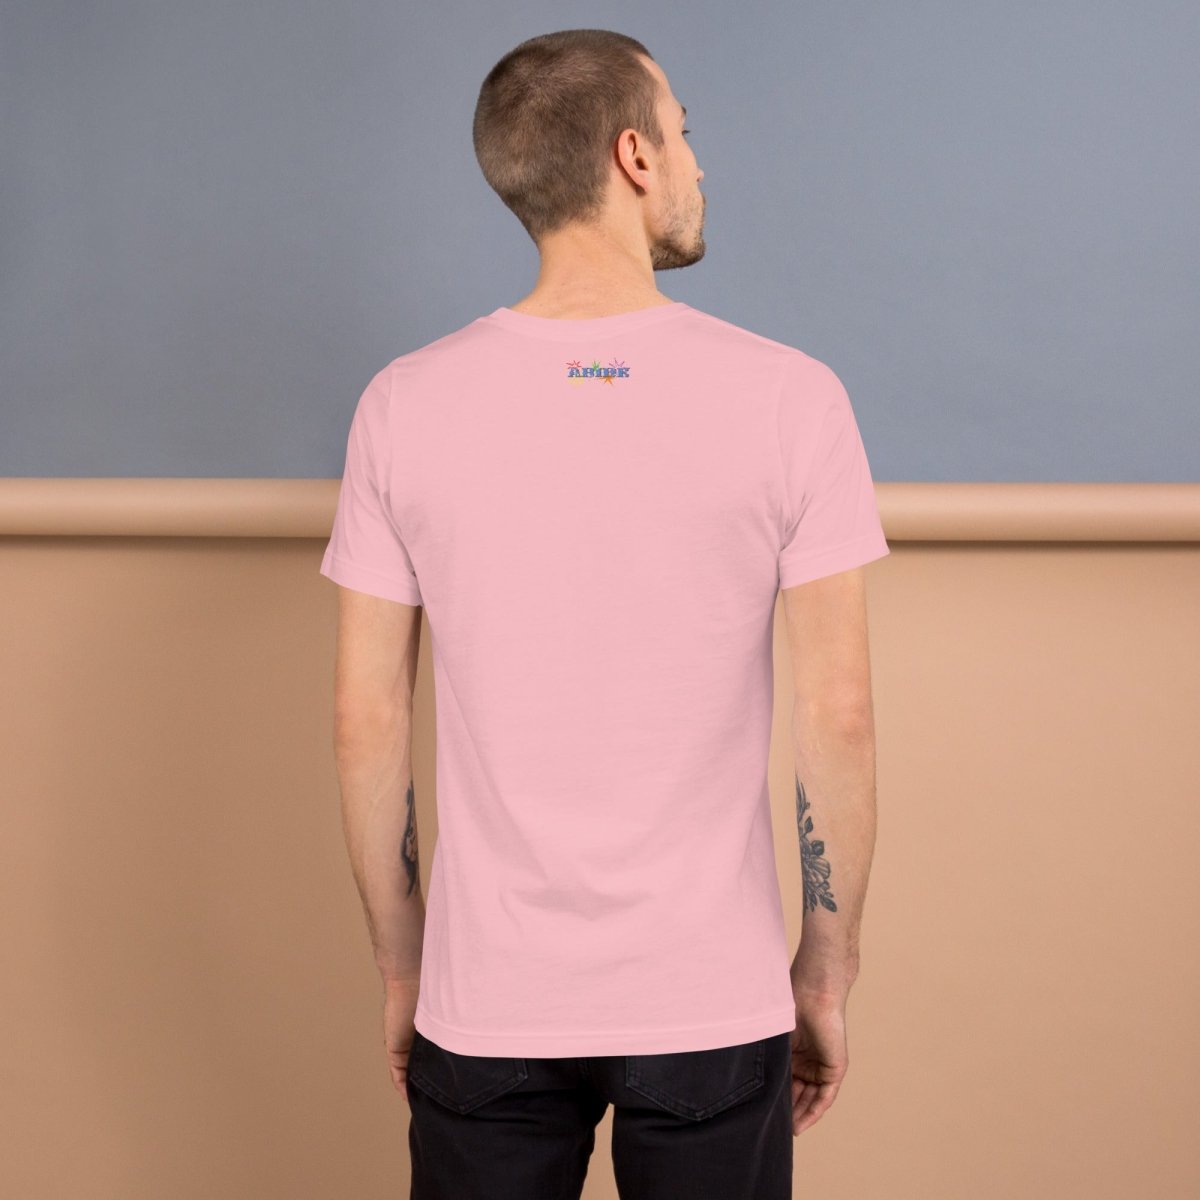 Dad Noises- Dadisms - Don't Make Me Pull This Car Over Pink Unisex t-shirt back view - The Dude Abides - Birthday